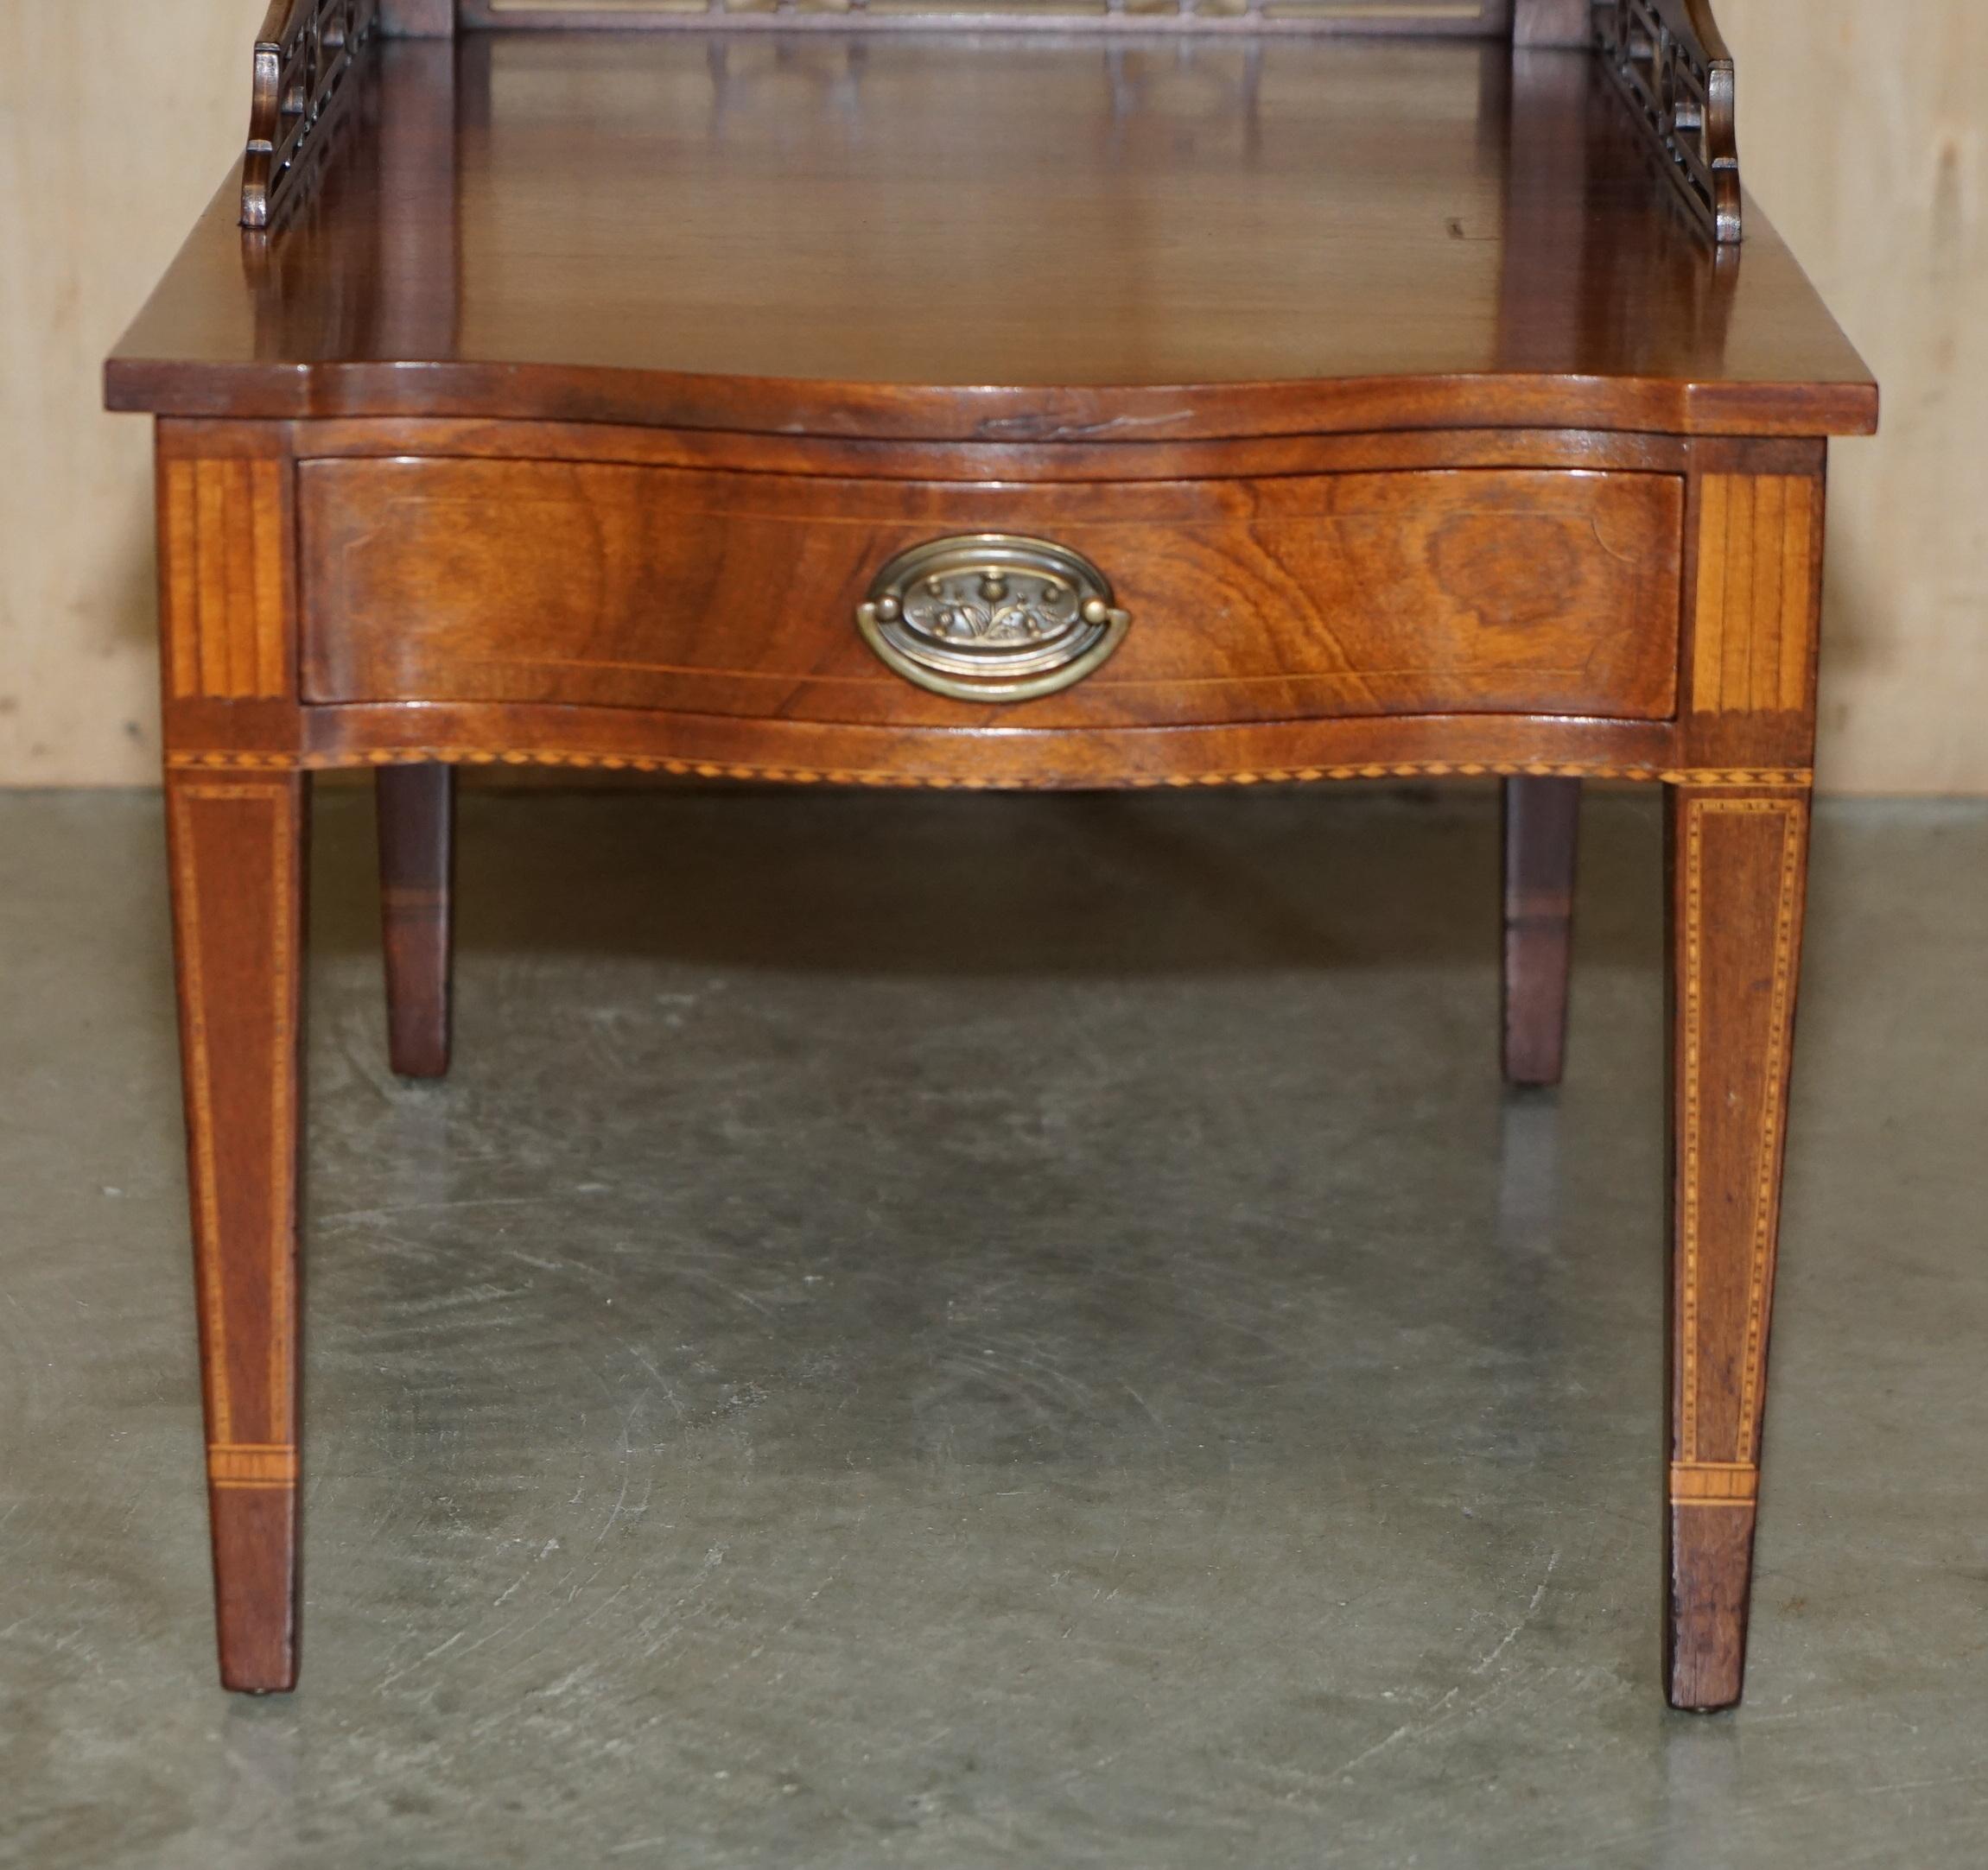 PAIR OF WALNUT FRET WORK CARVED THOMAS CHIPPENDALE SHERATON REVIVAL SIDE TABLEs For Sale 11